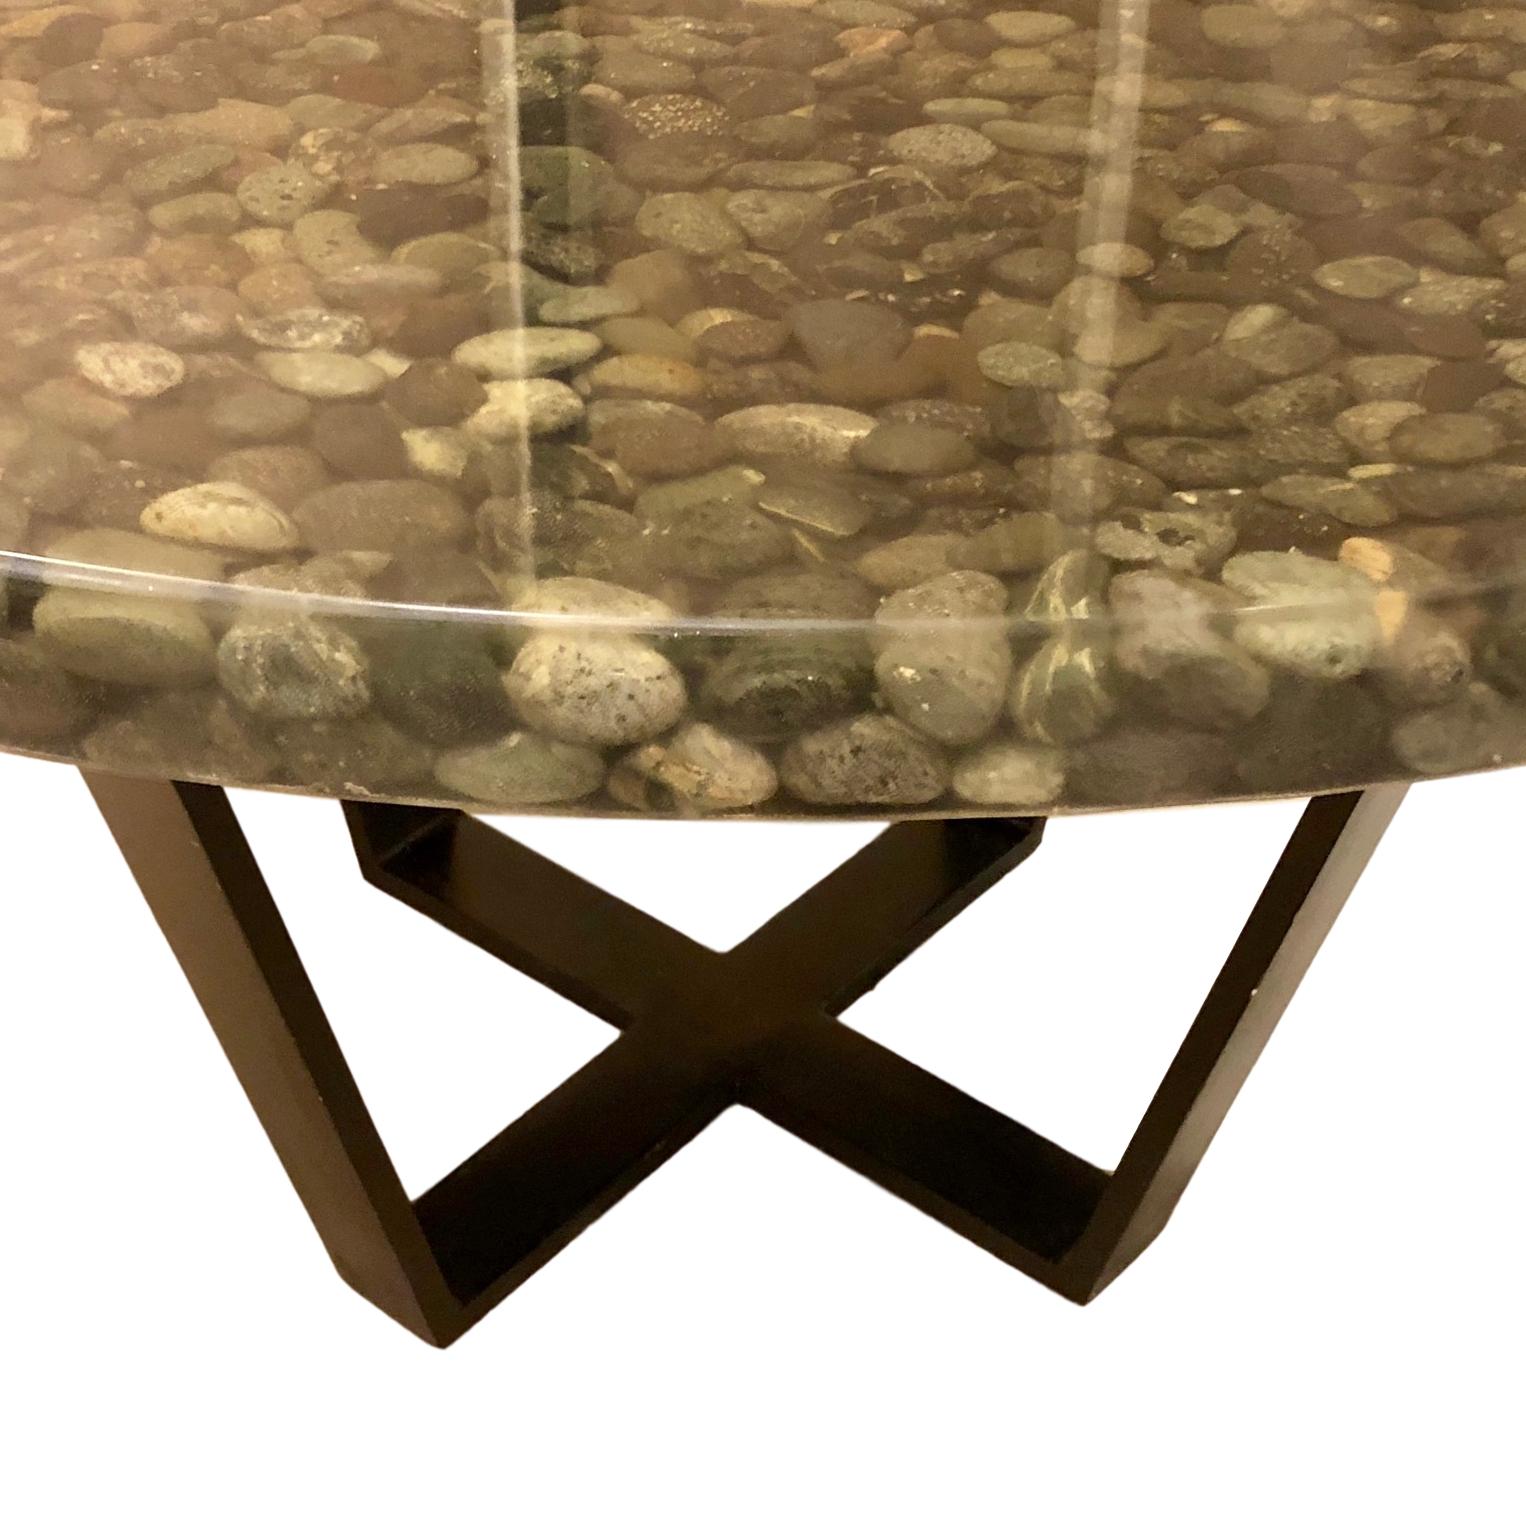 A circa 1960s Italian stone and resin dining table with iron base.

Measurements:
Height 30.5